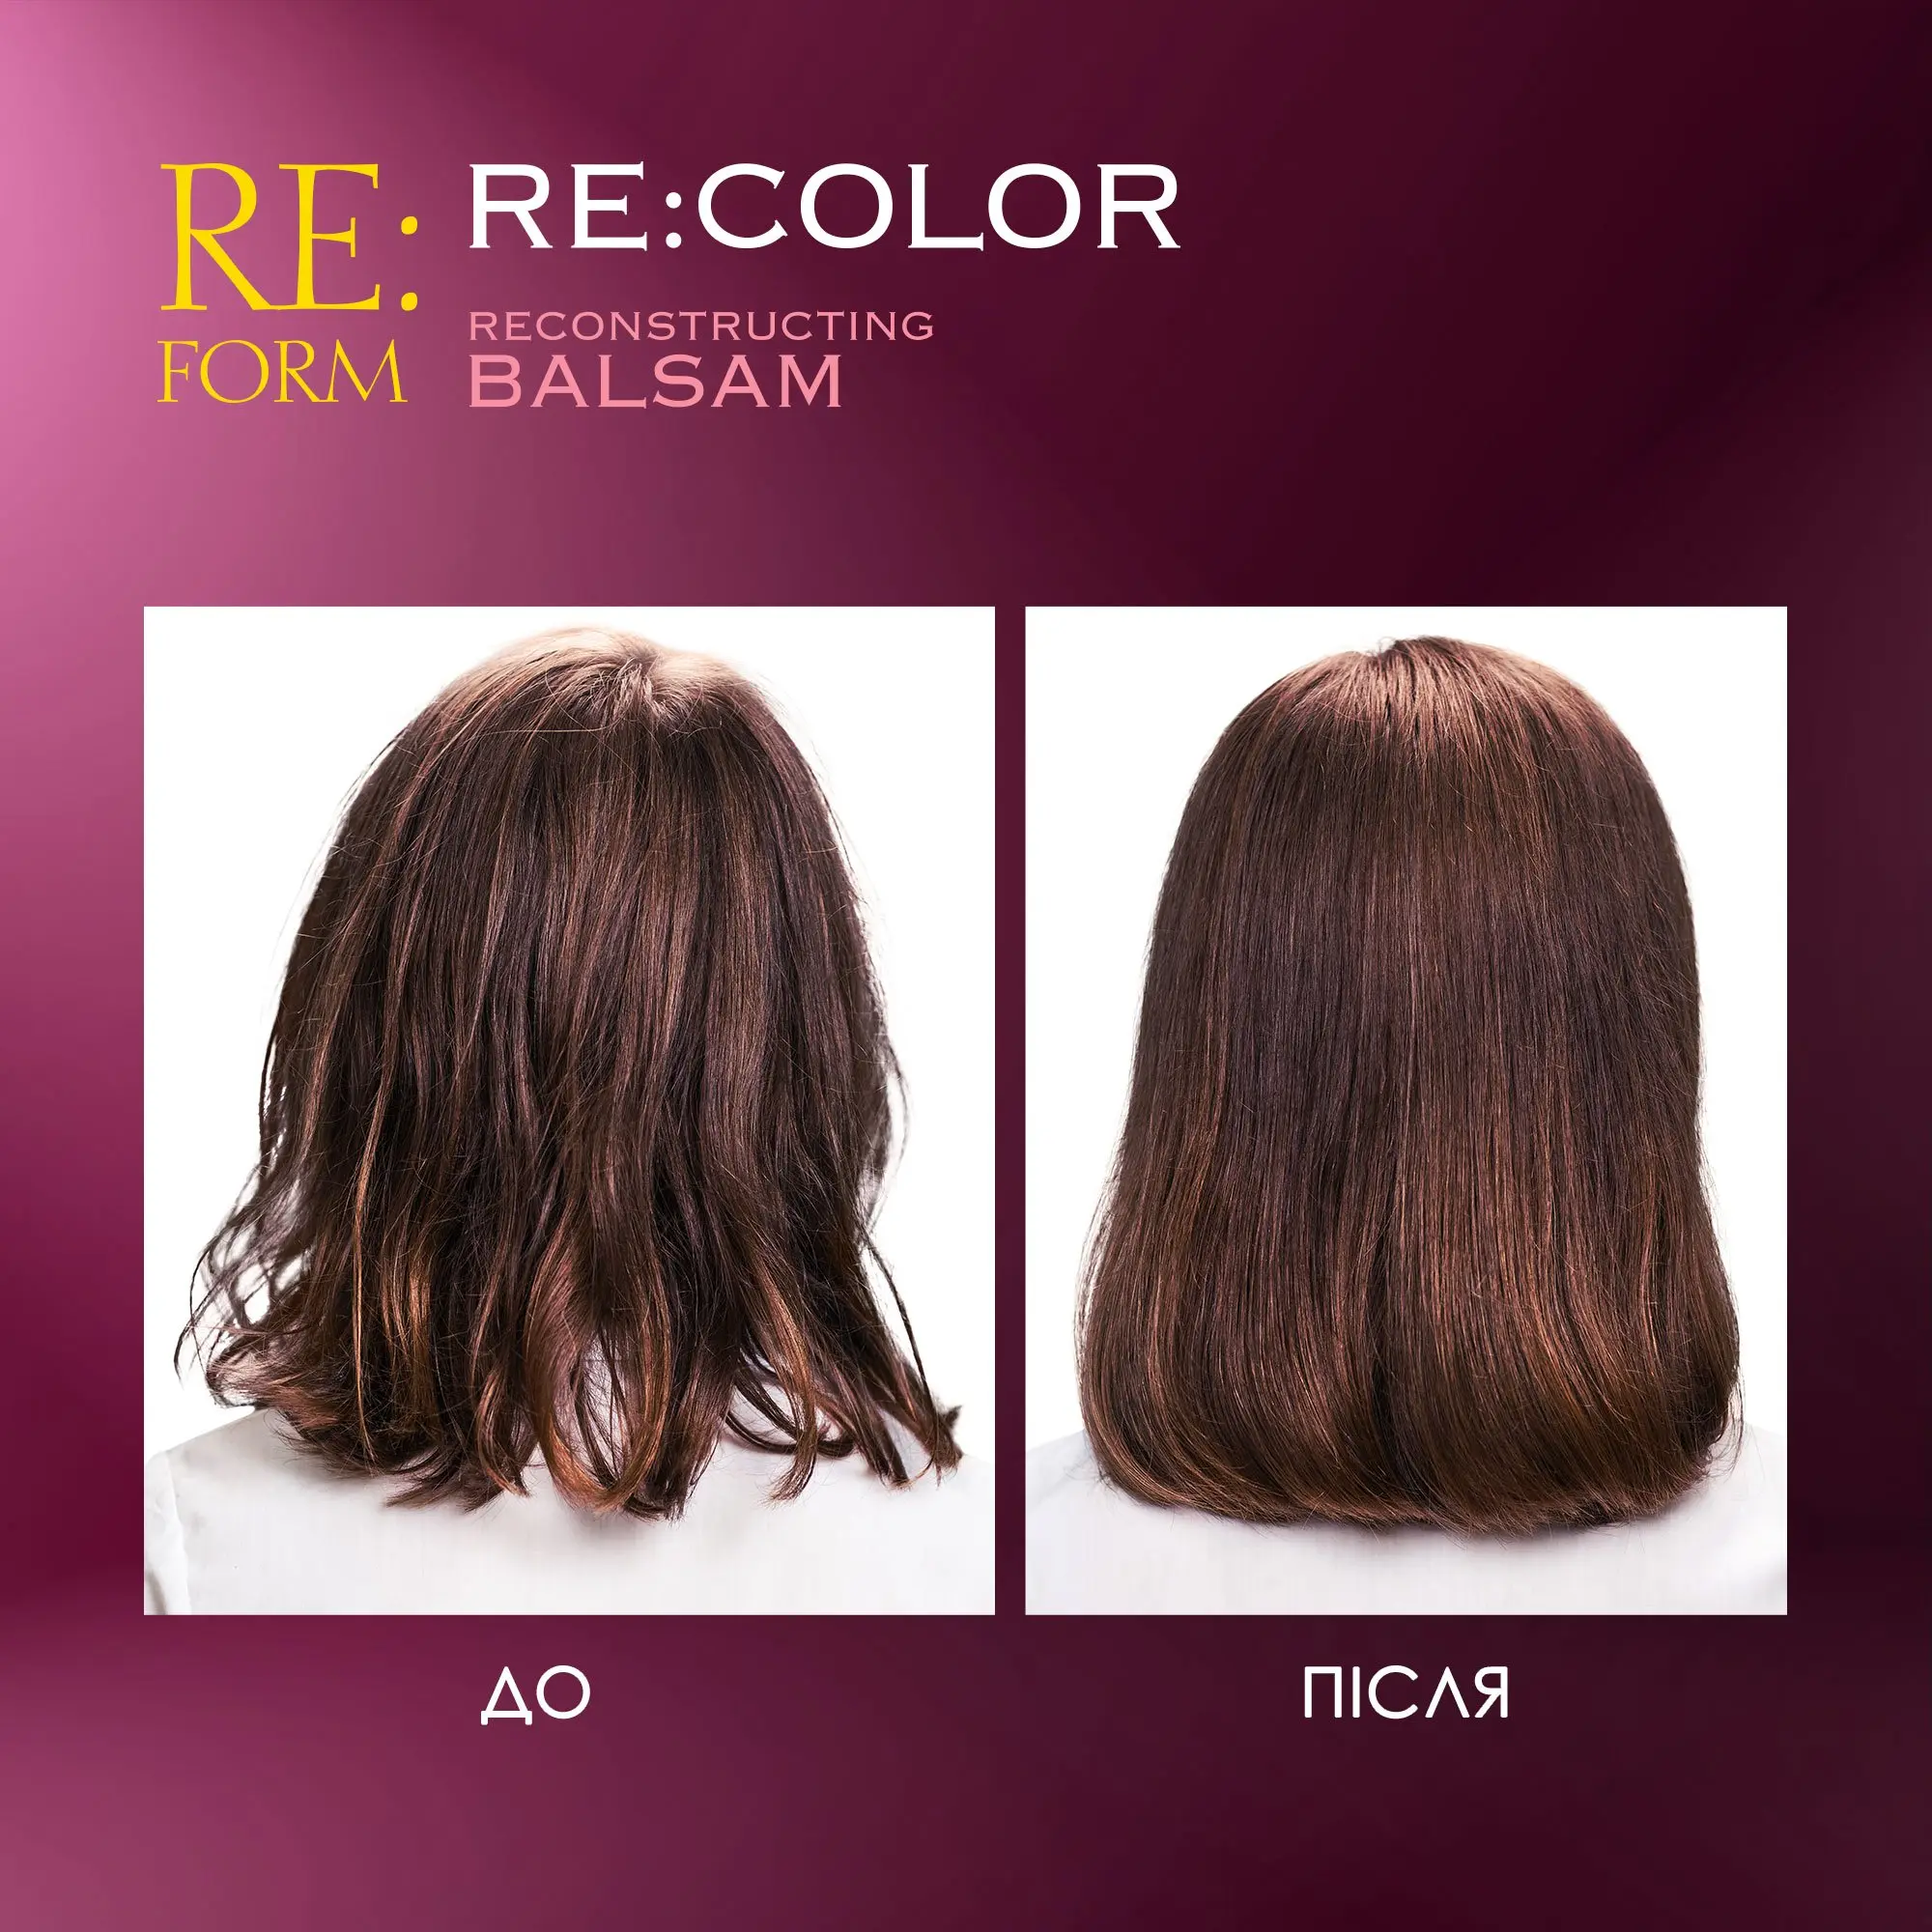 Reconstructing balm, 'RE:COLOR' RE:FORM, 400 ml Фото №10